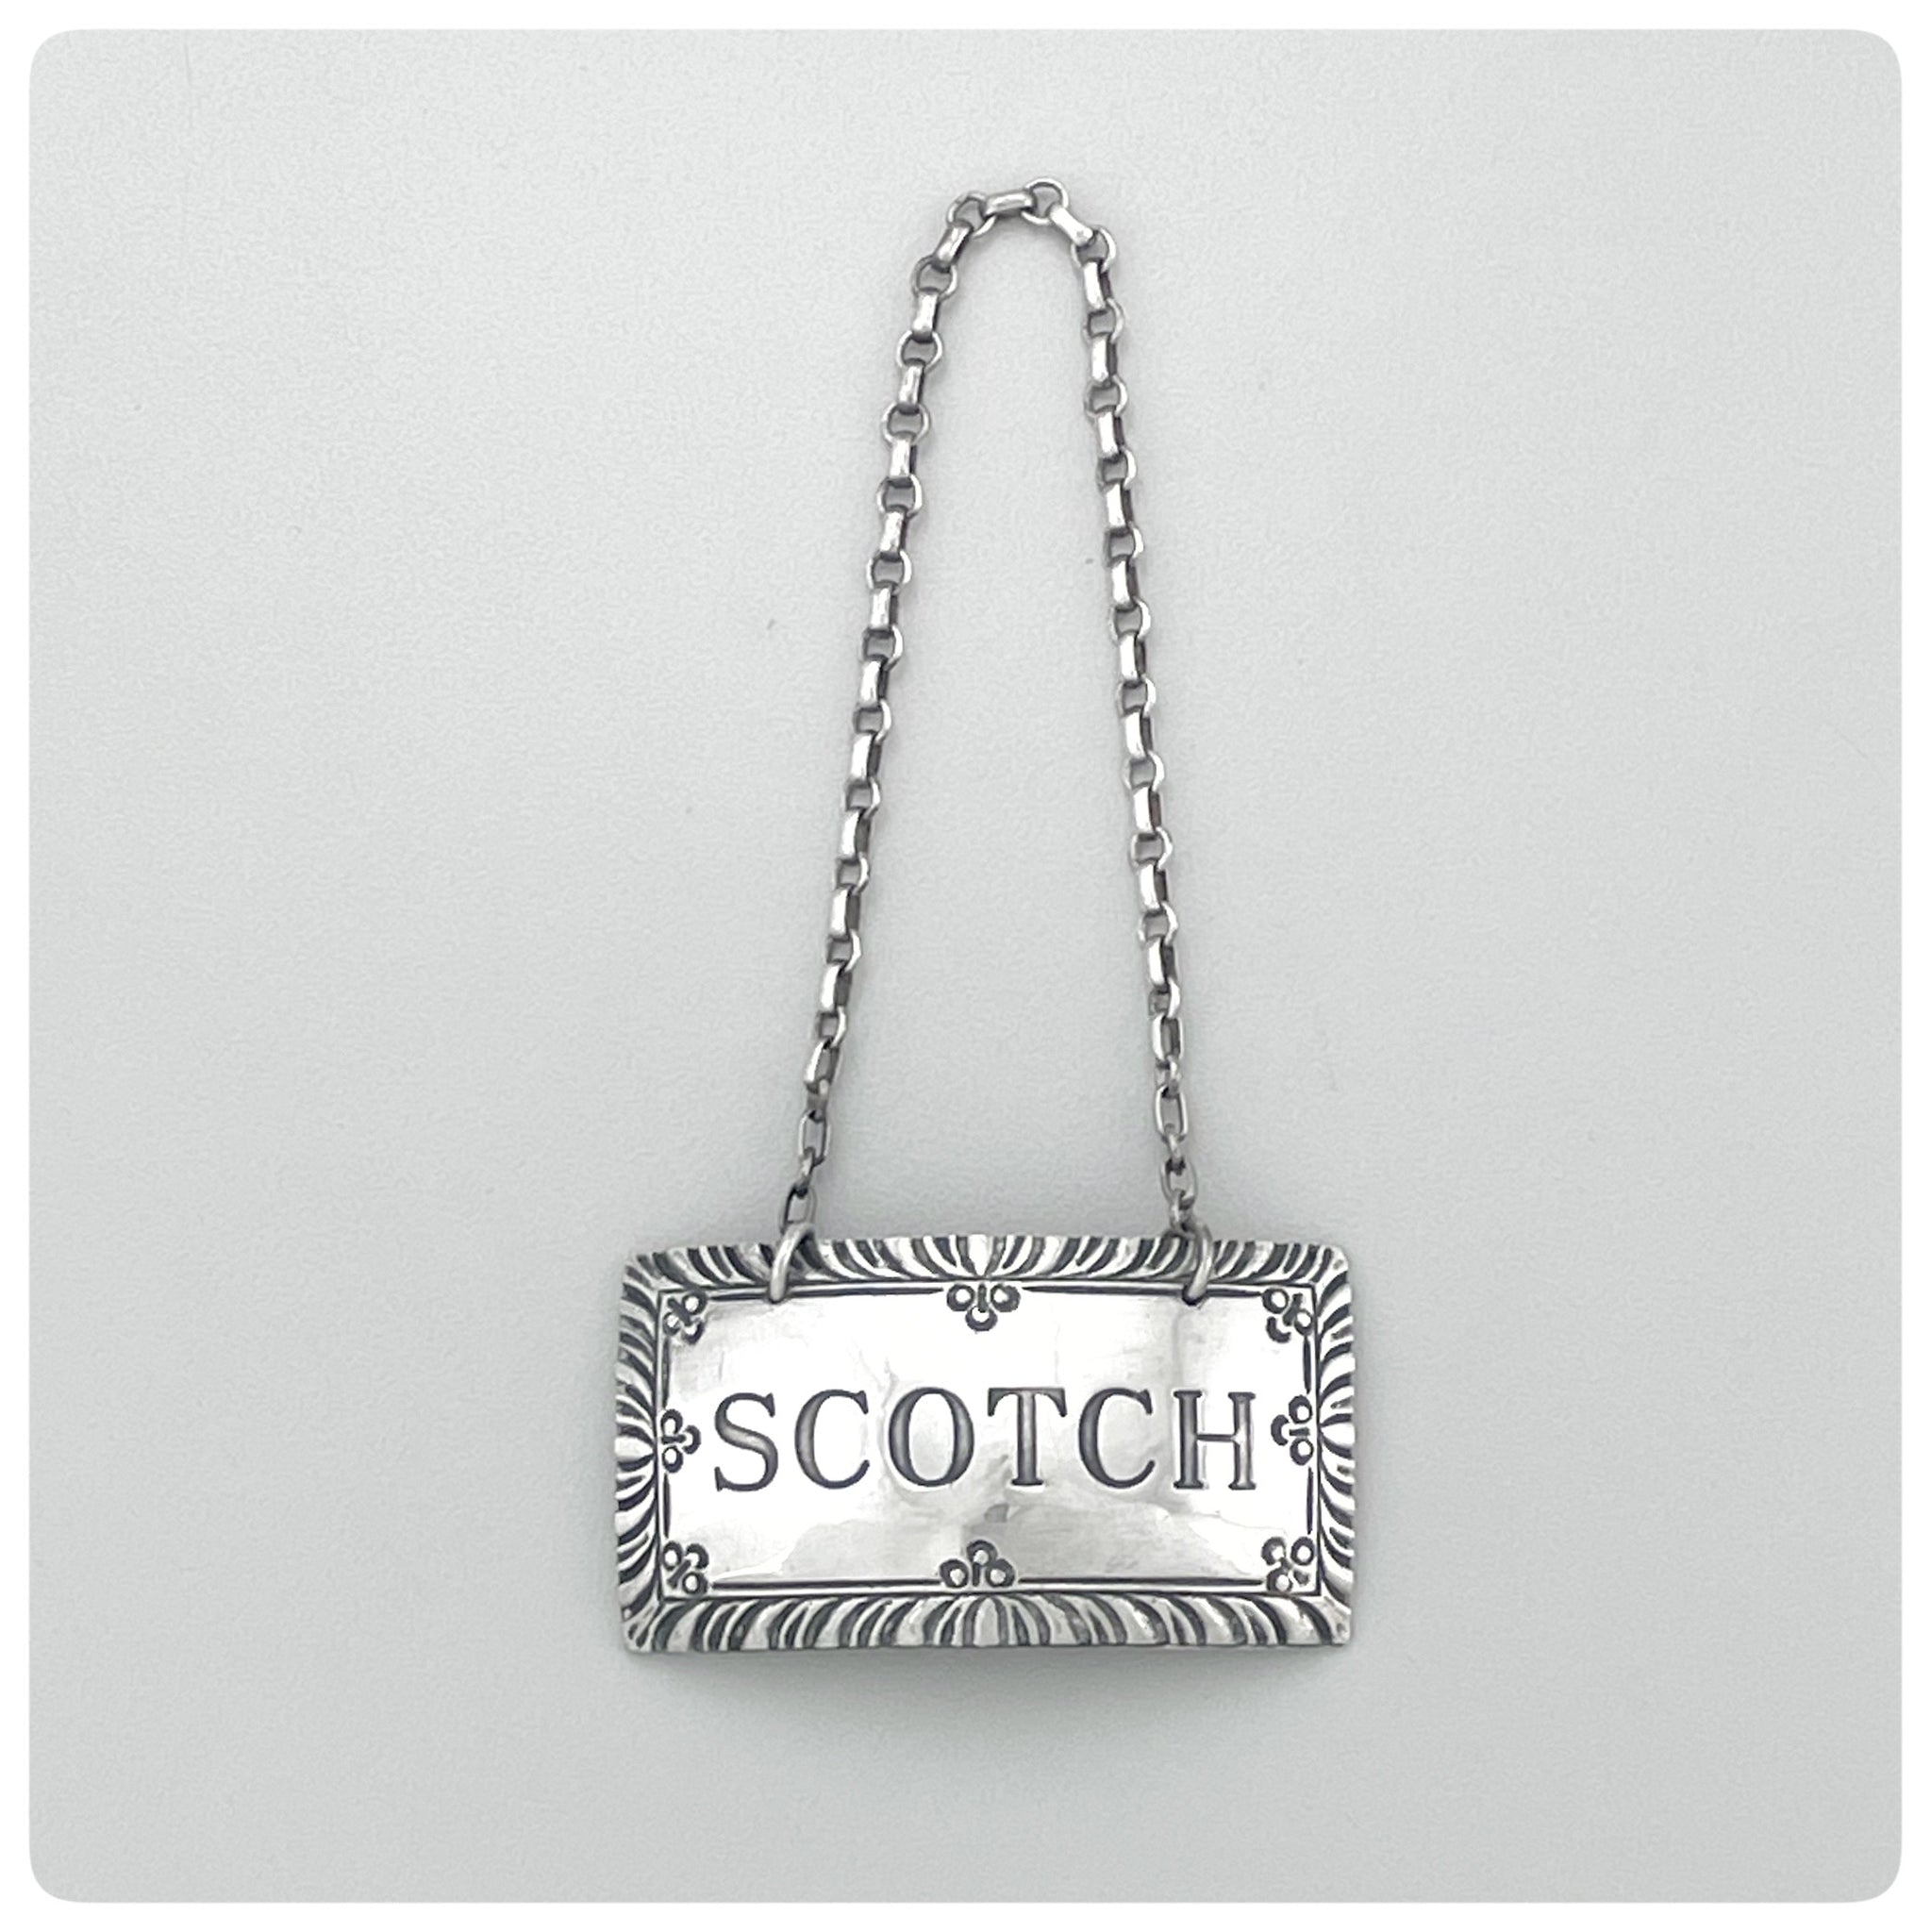 American Sterling Silver "Scotch" Decanter Label / Tag, Stieff Company for Colonial Williamsburg, Baltimore, MD, 20th Century - The Silver Vault of Charleston